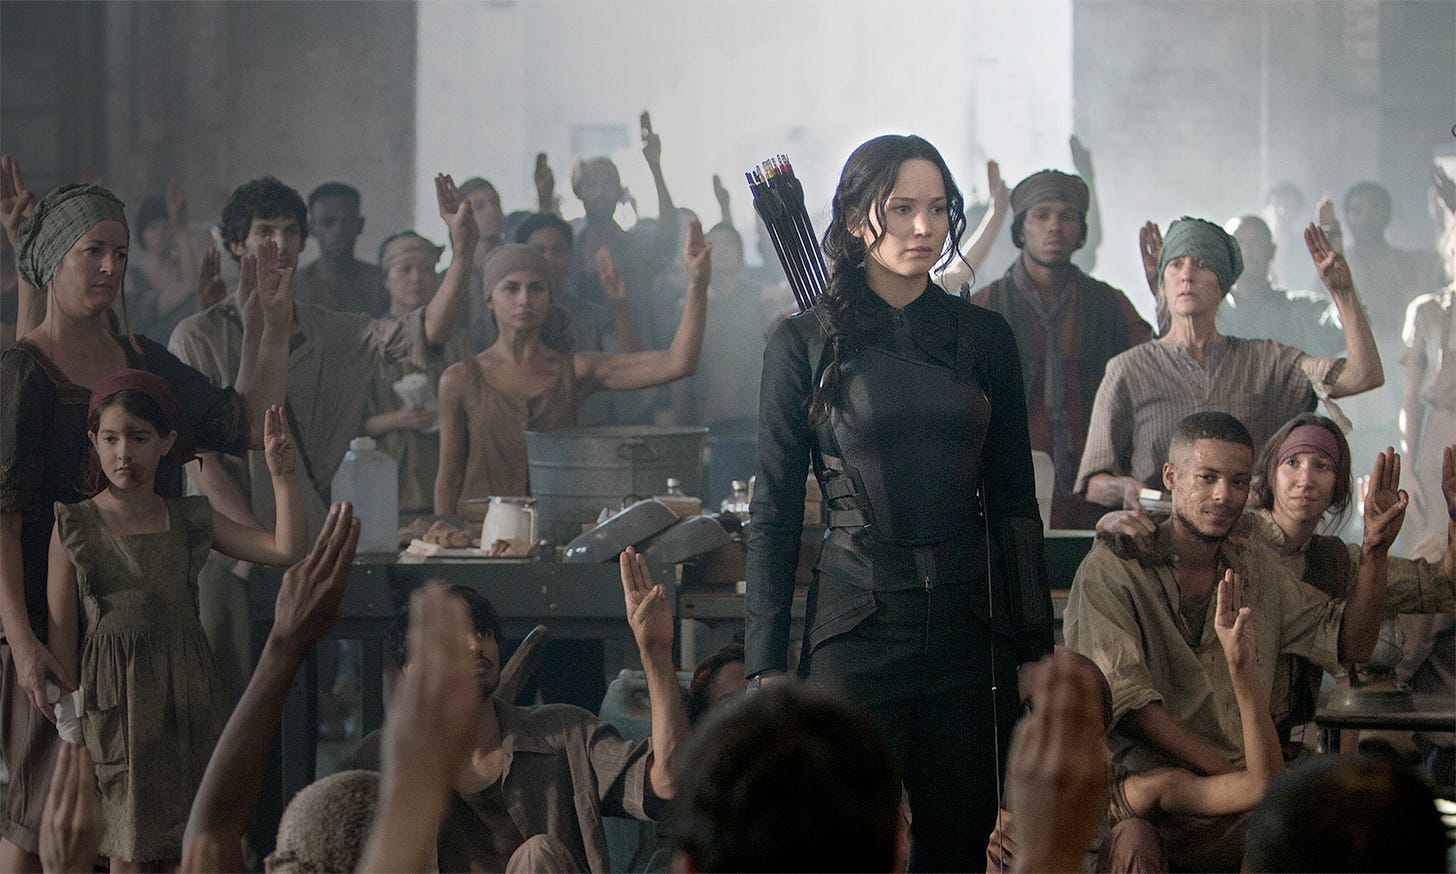 Katniss Everdeen and her supporters, from the Hunger Games series